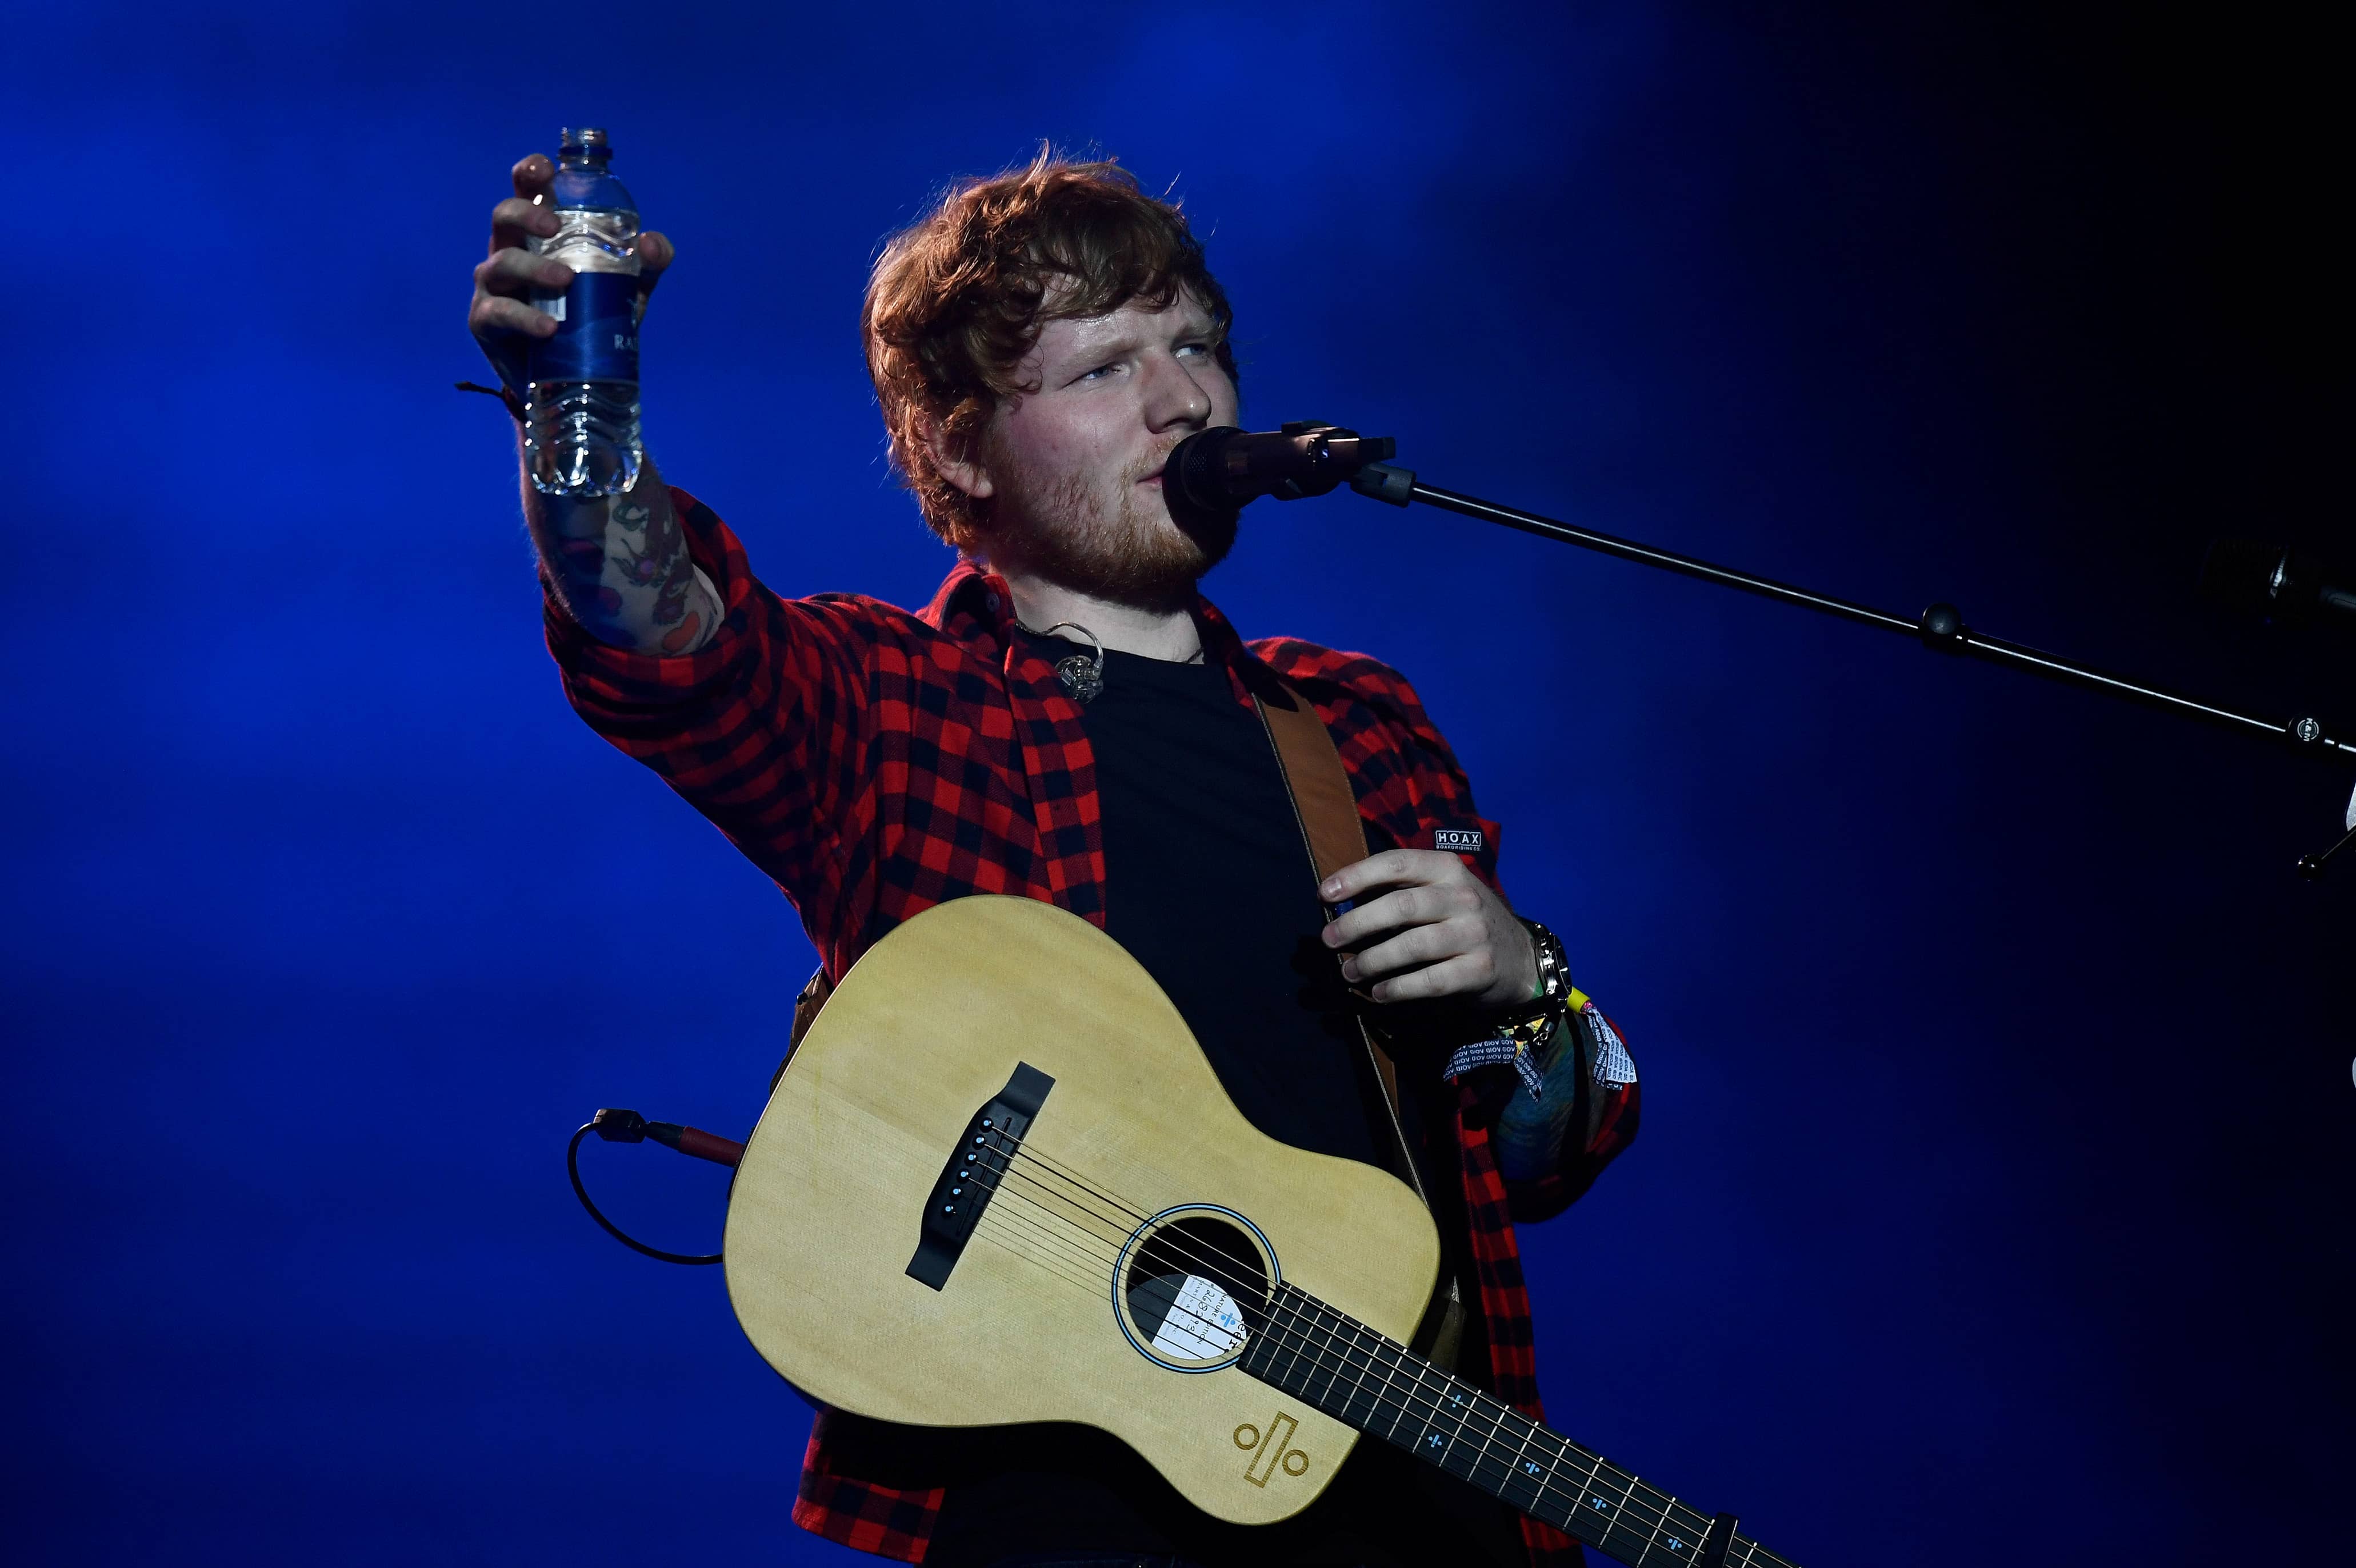 ed-sheeran-performs-at-worthy-farm-in-somerset-during-the-glastonbury-festival